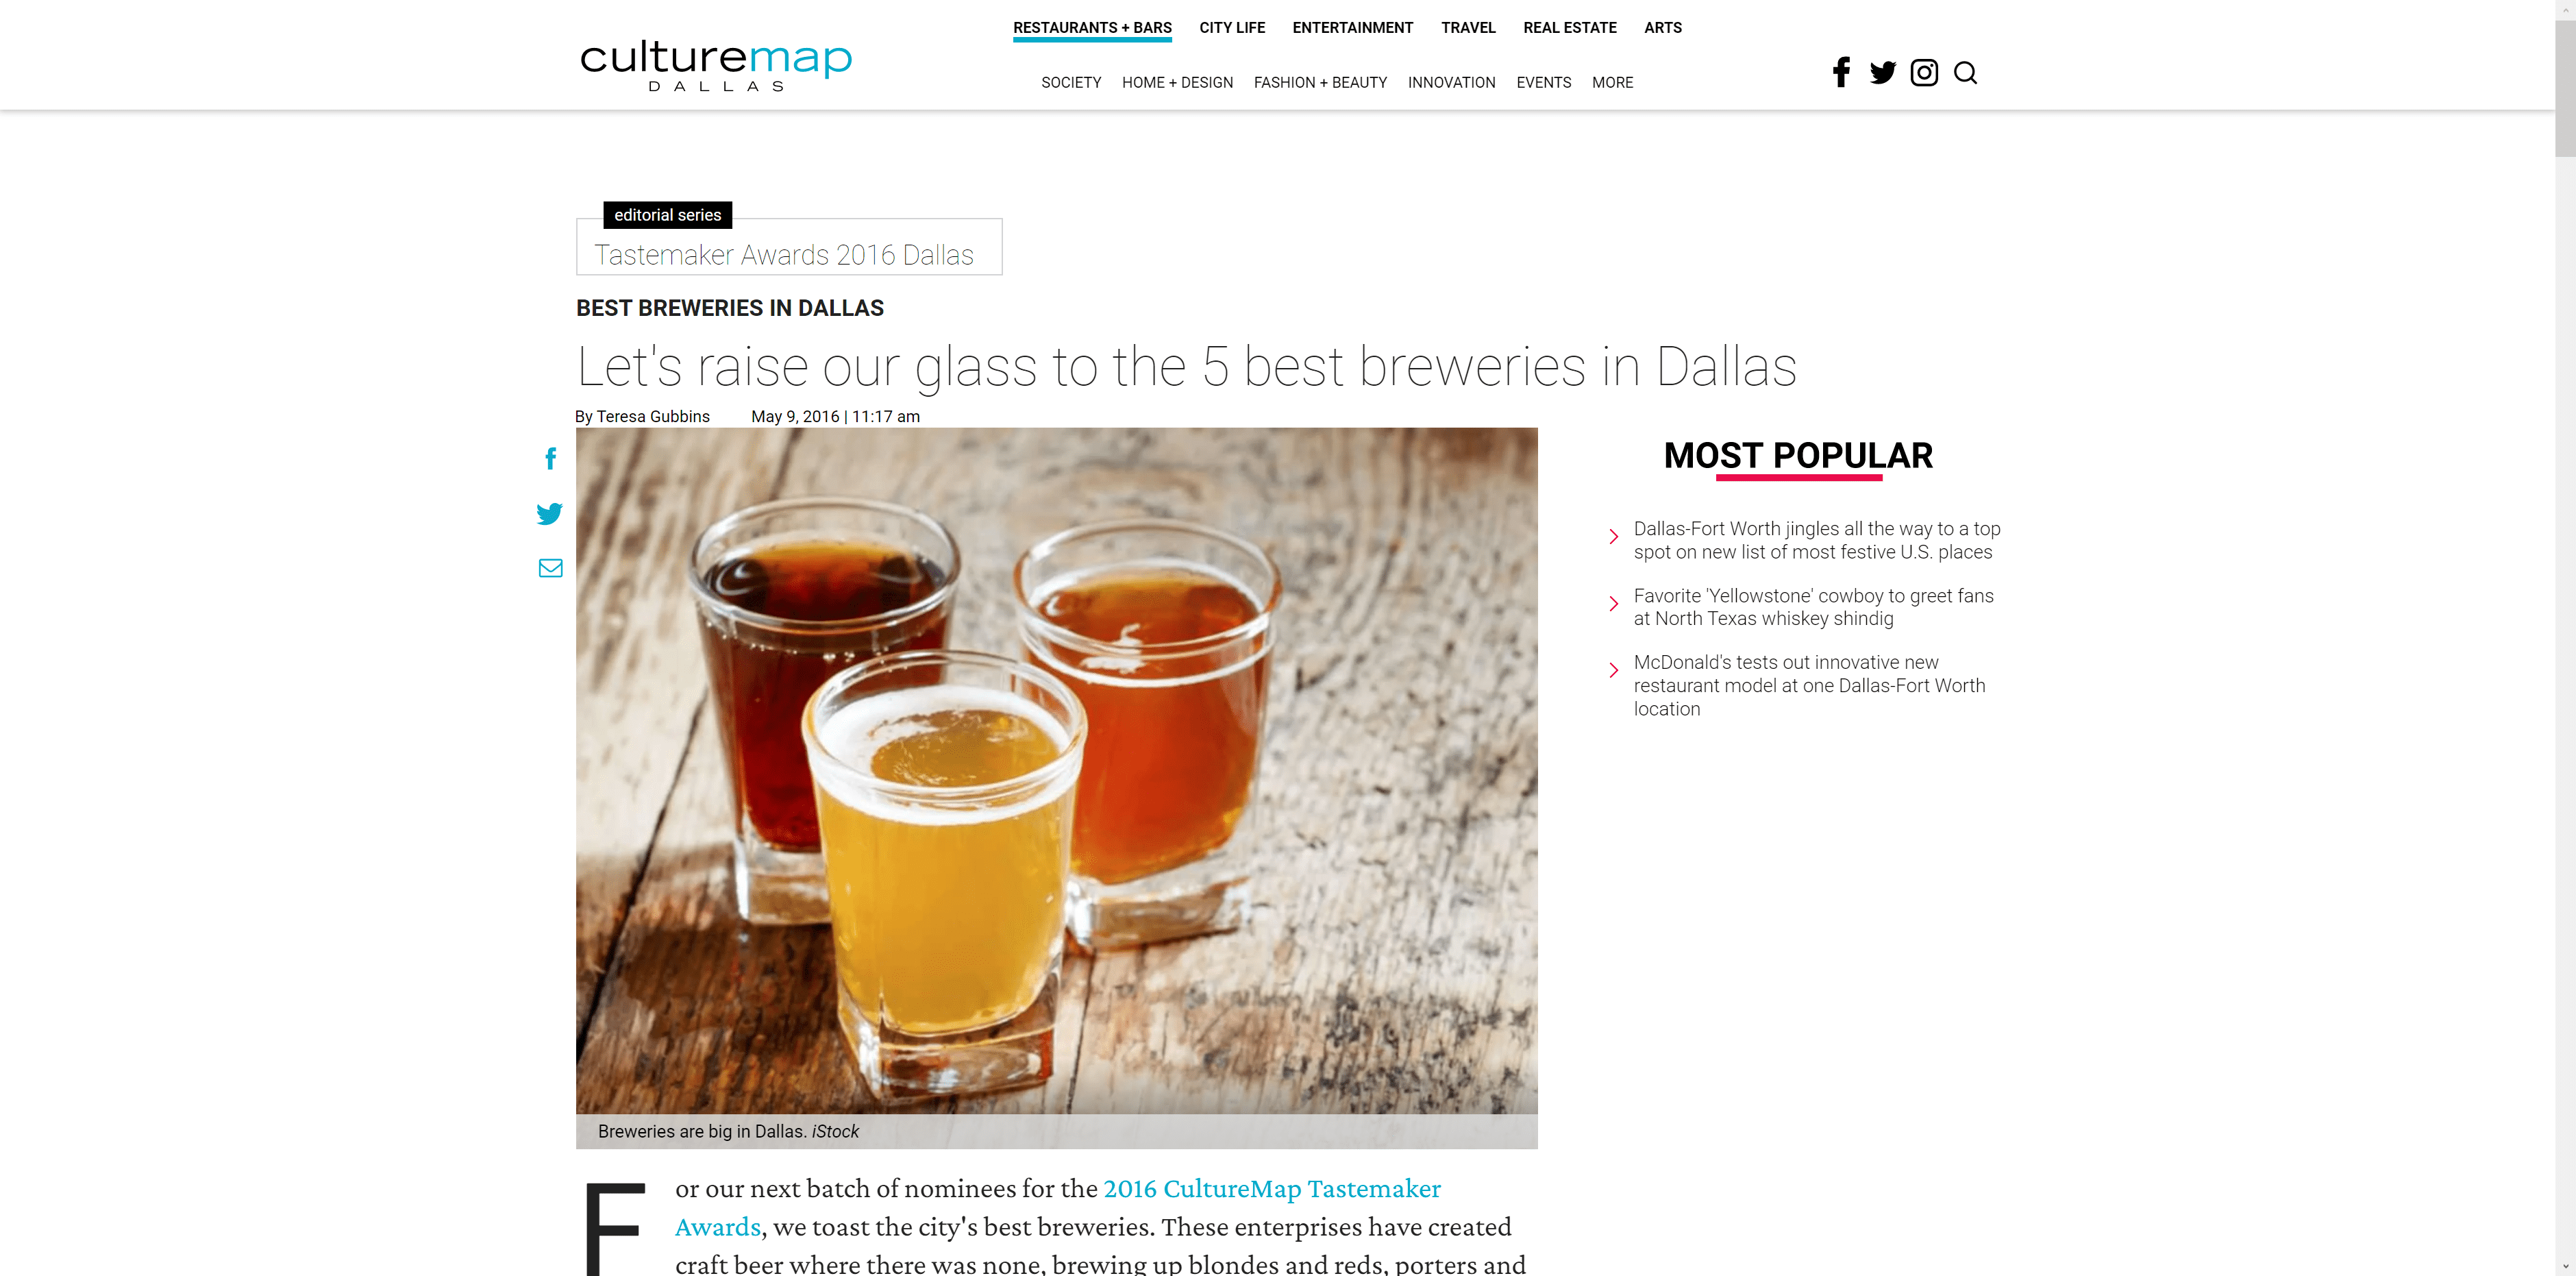 Raise a glass to the 5 best breweries in Dallas in CultureMap Dallas